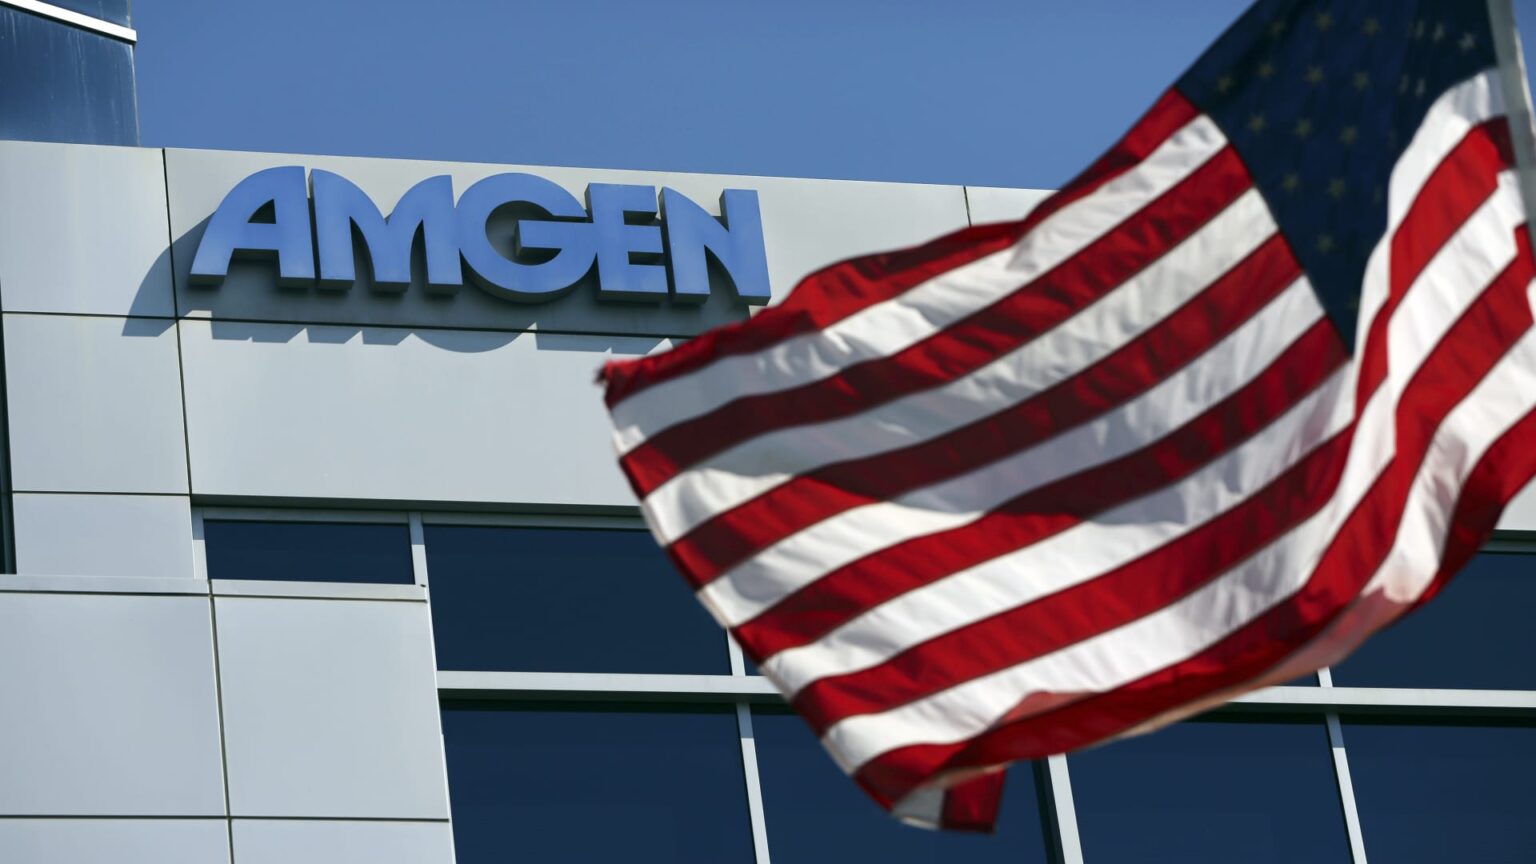 The deal between Horizon Therapeutics and Amgen could close Q3 if the FTC bloc fails